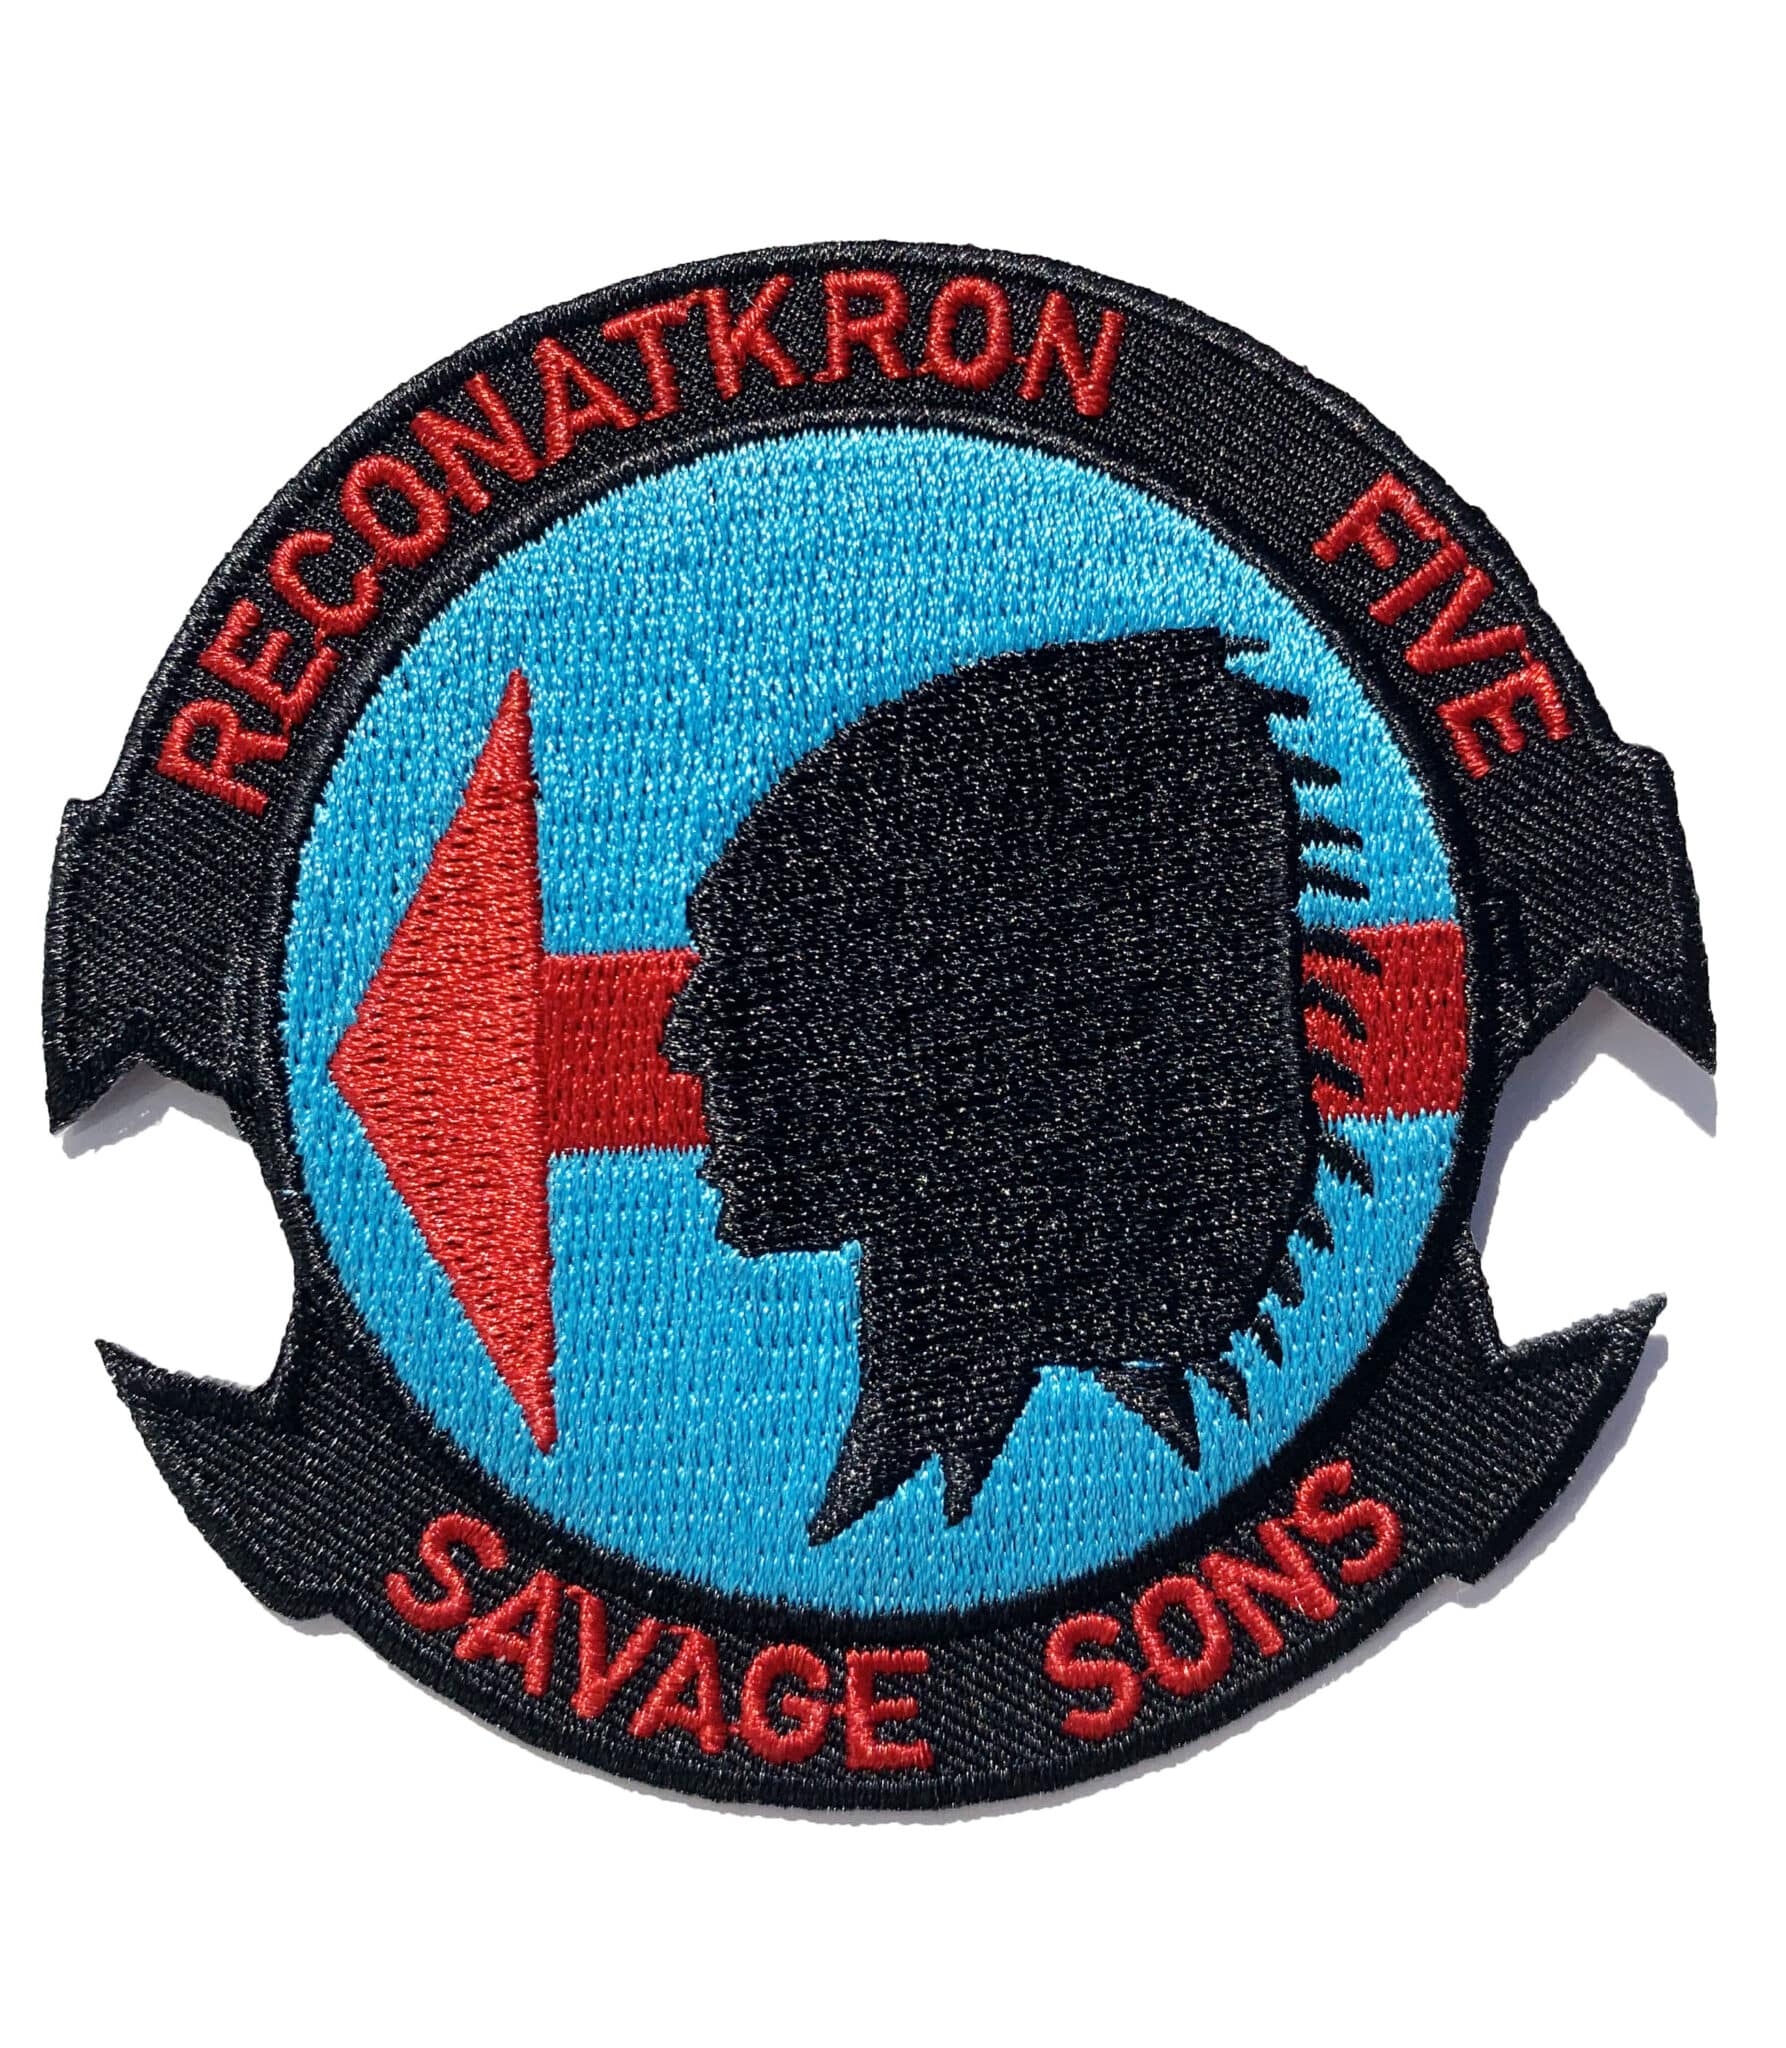 RVAH-5 Savage Sons Squadron Patch – Sew On